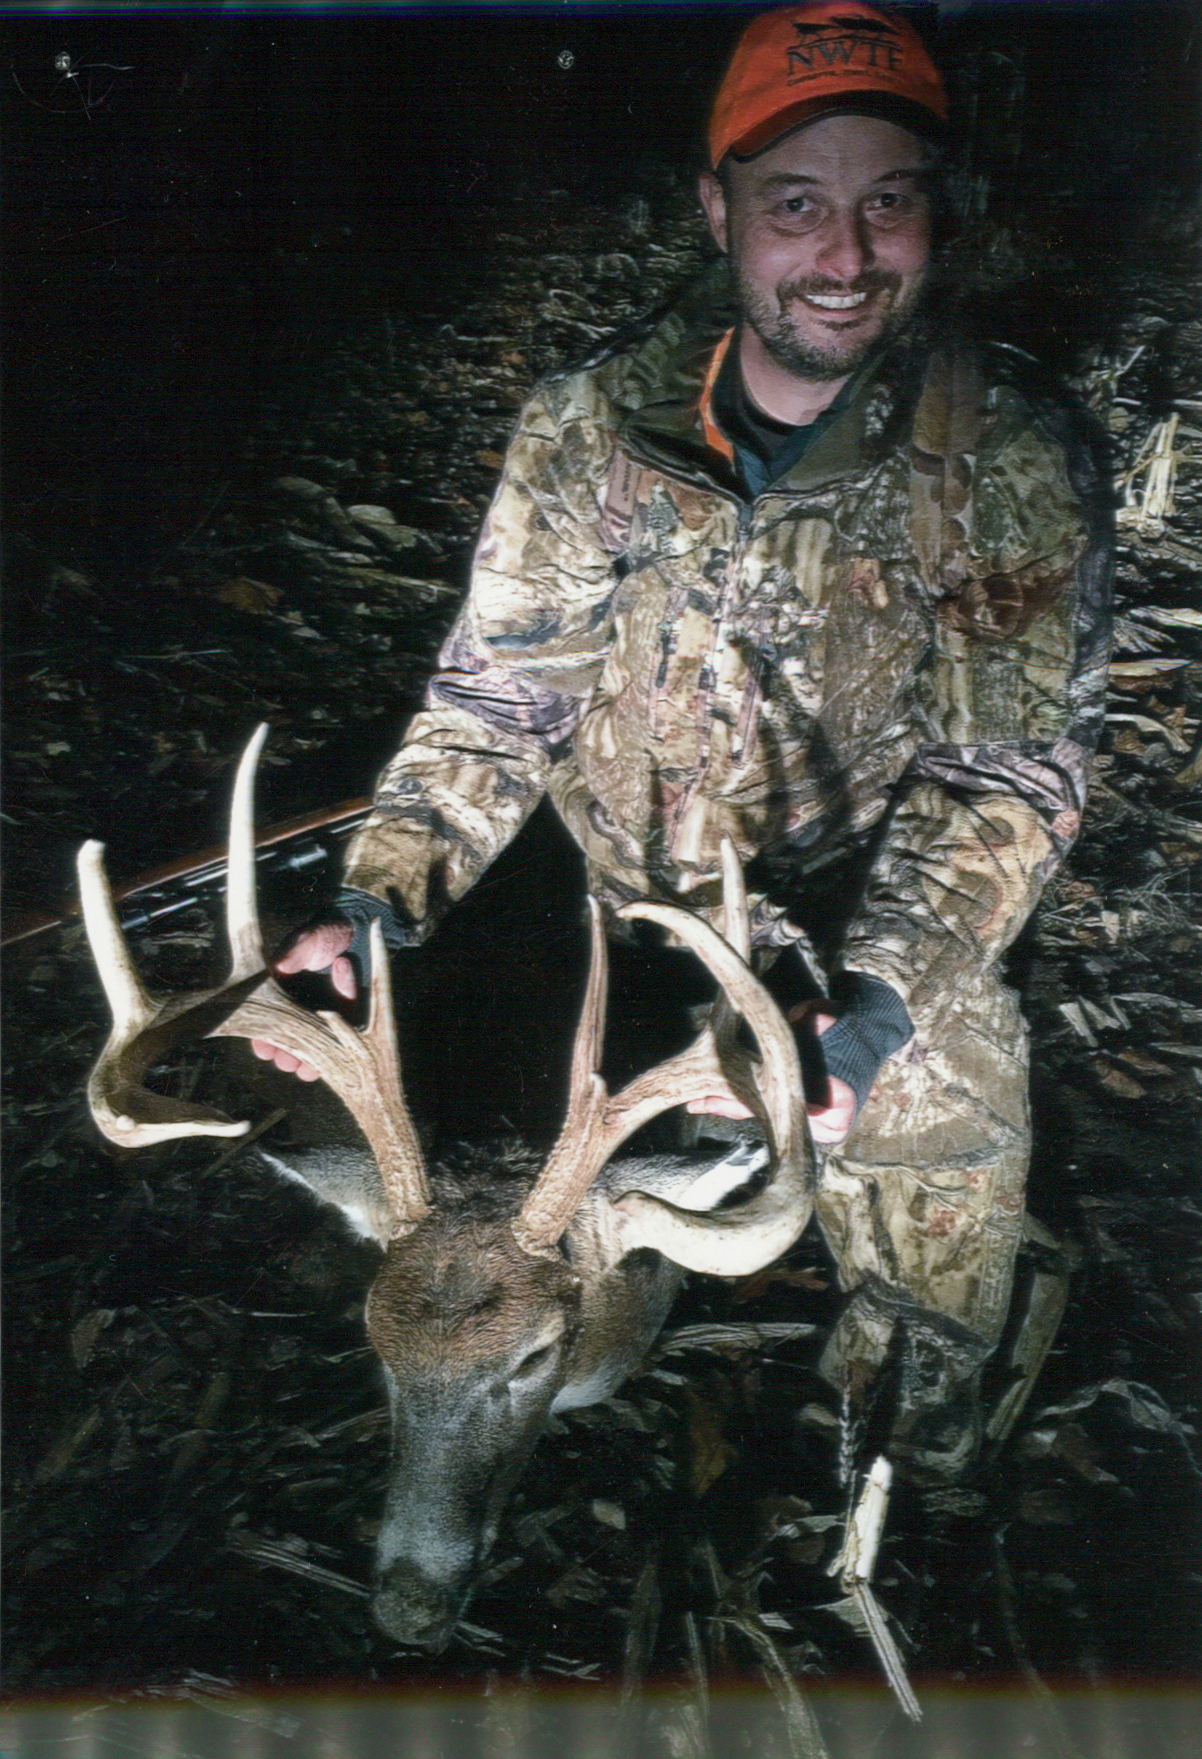 Affordable Trophy Whitetail Hunts